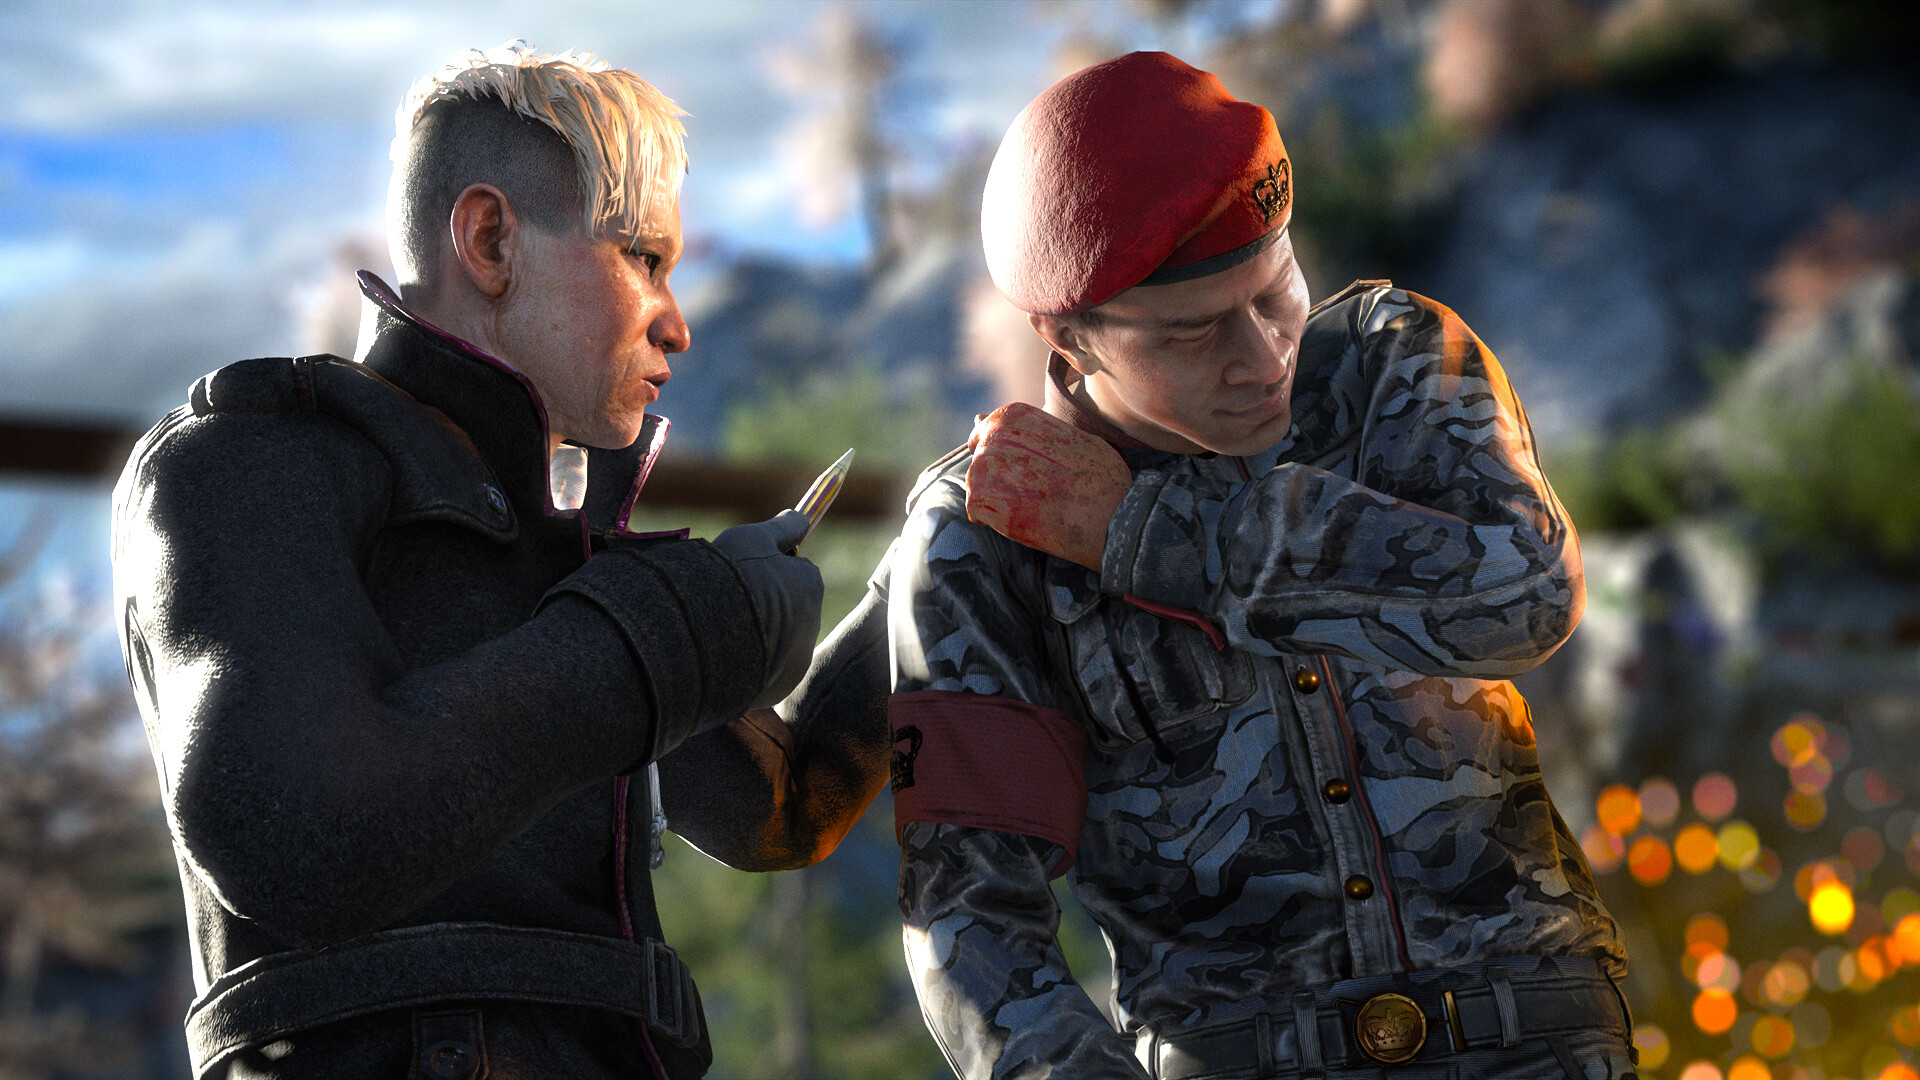 Far Cry 4 Uplay key, Buy for the best price! Visit!